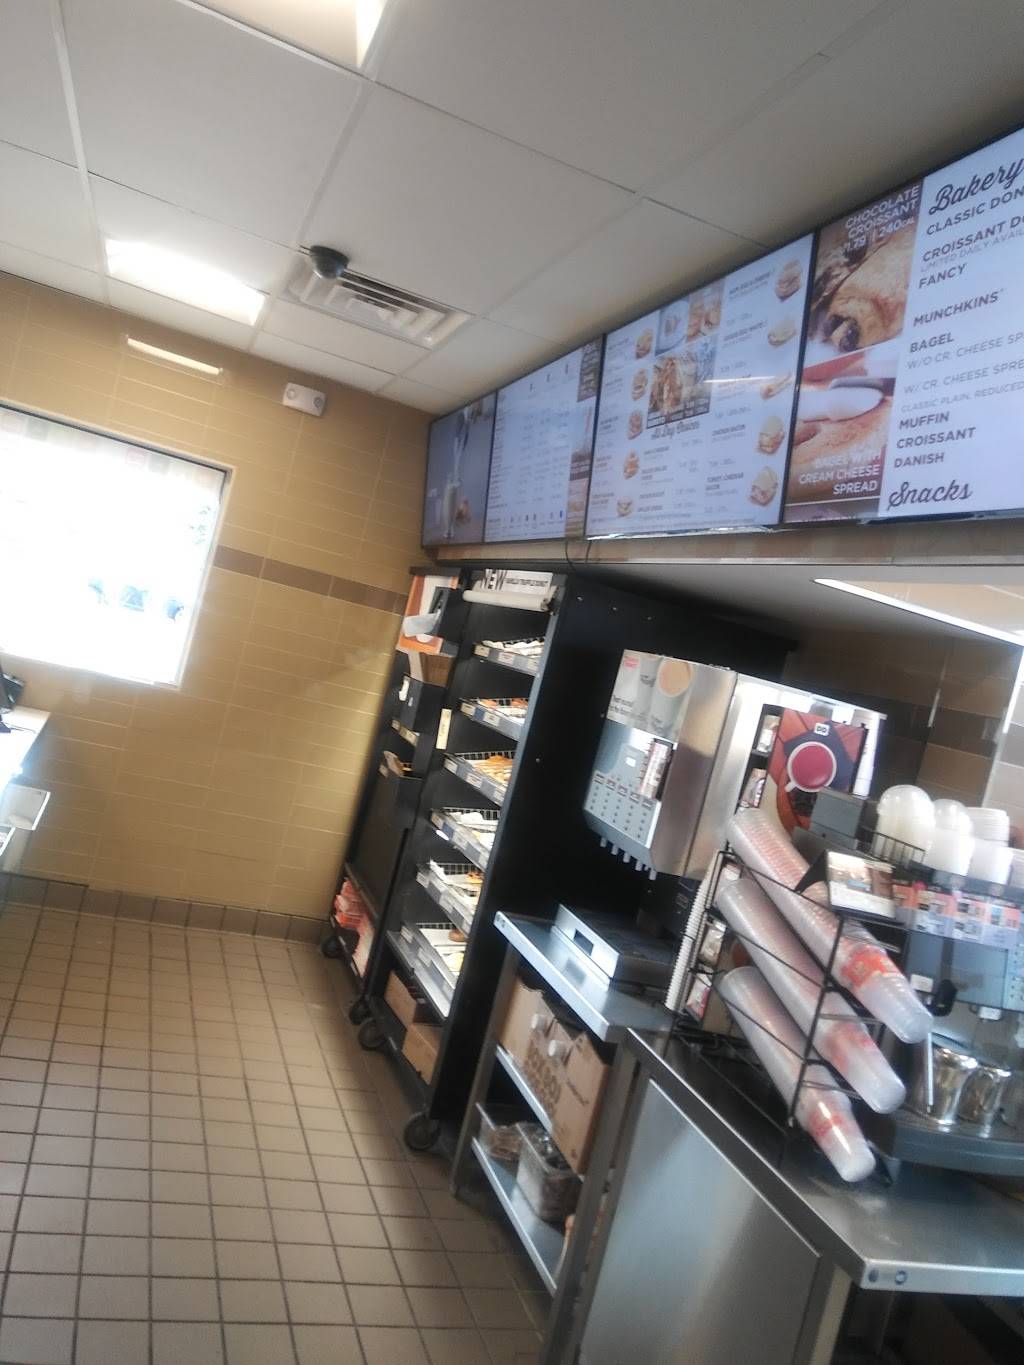 Dunkin Donuts | cafe | 250 Sibley Blvd, Dolton, IL 60419, USA | 7082016300 OR +1 708-201-6300